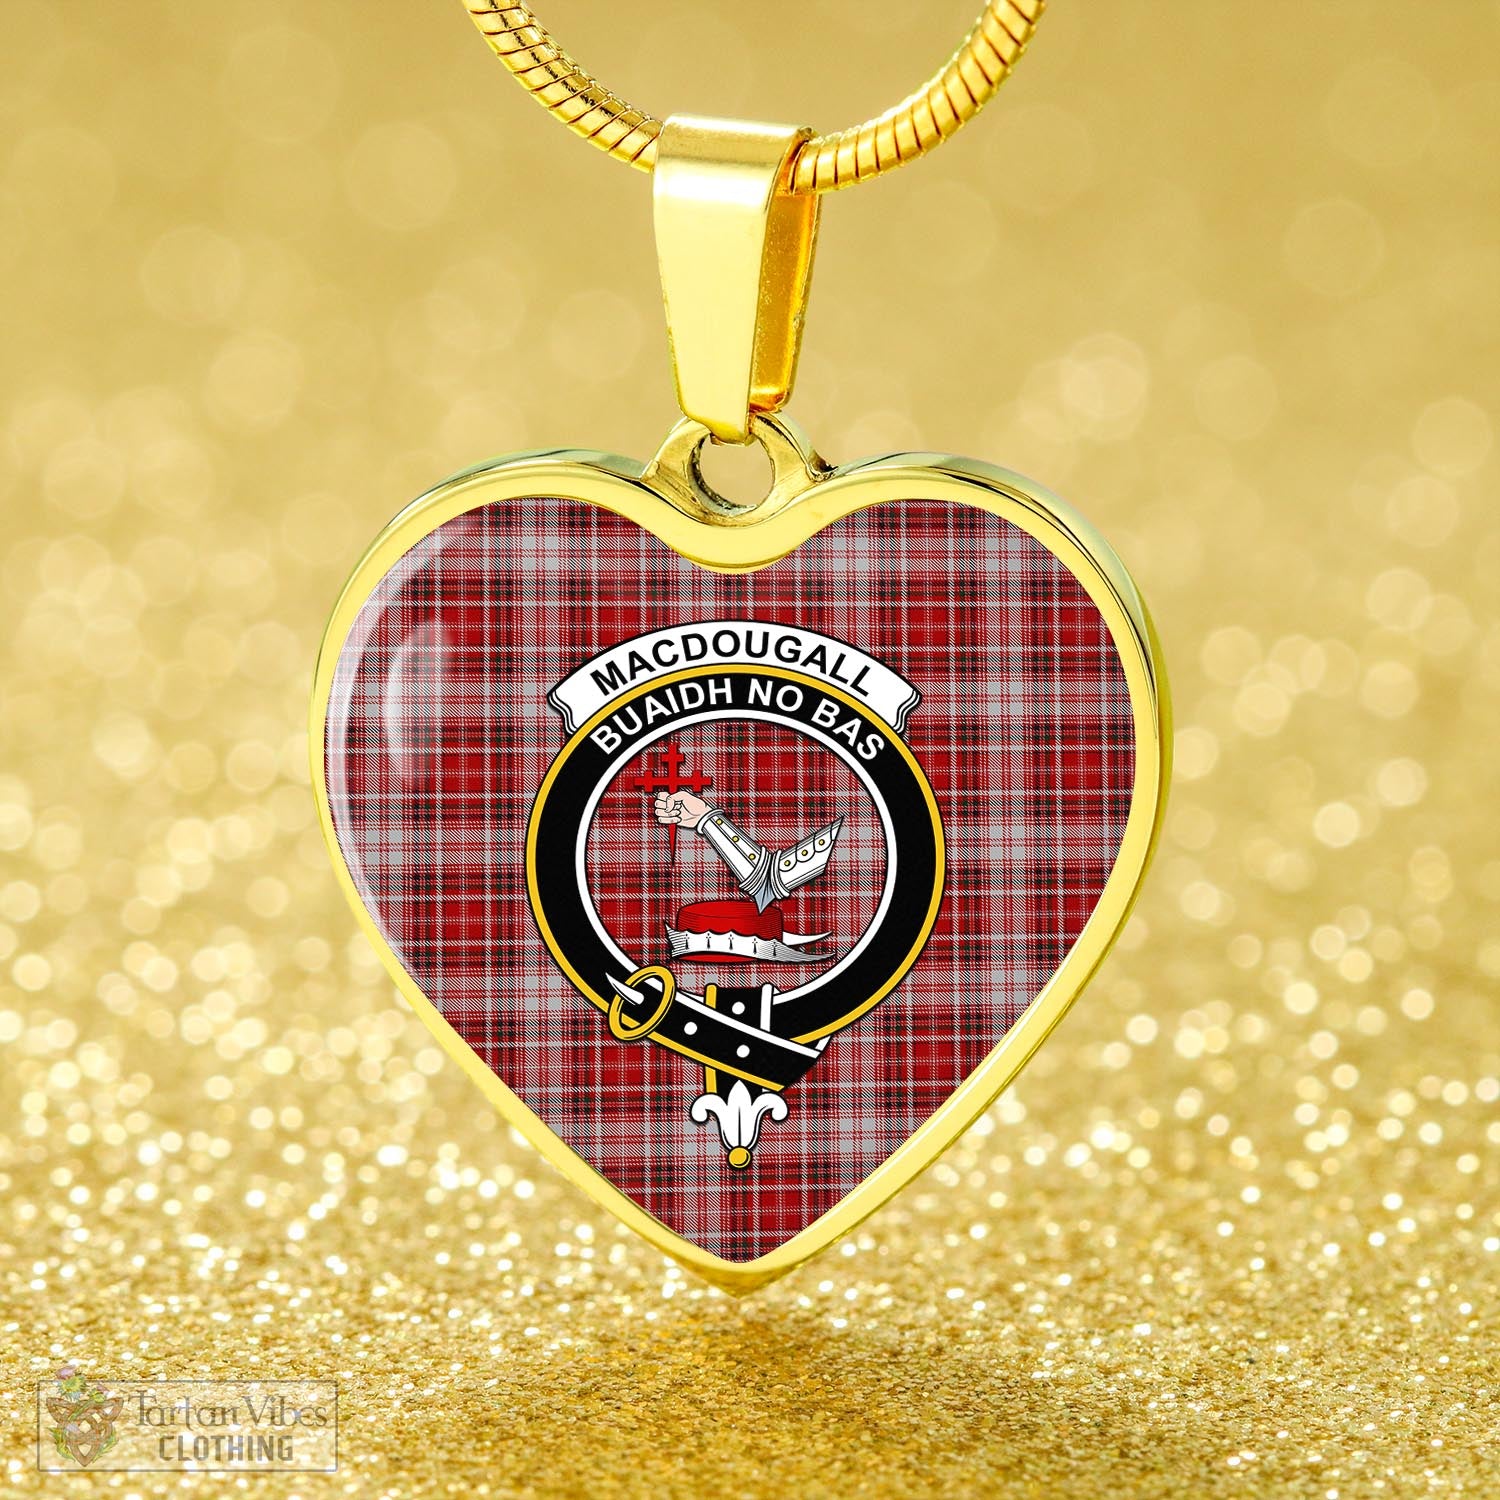 Tartan Vibes Clothing MacDougall Dress Tartan Heart Necklace with Family Crest